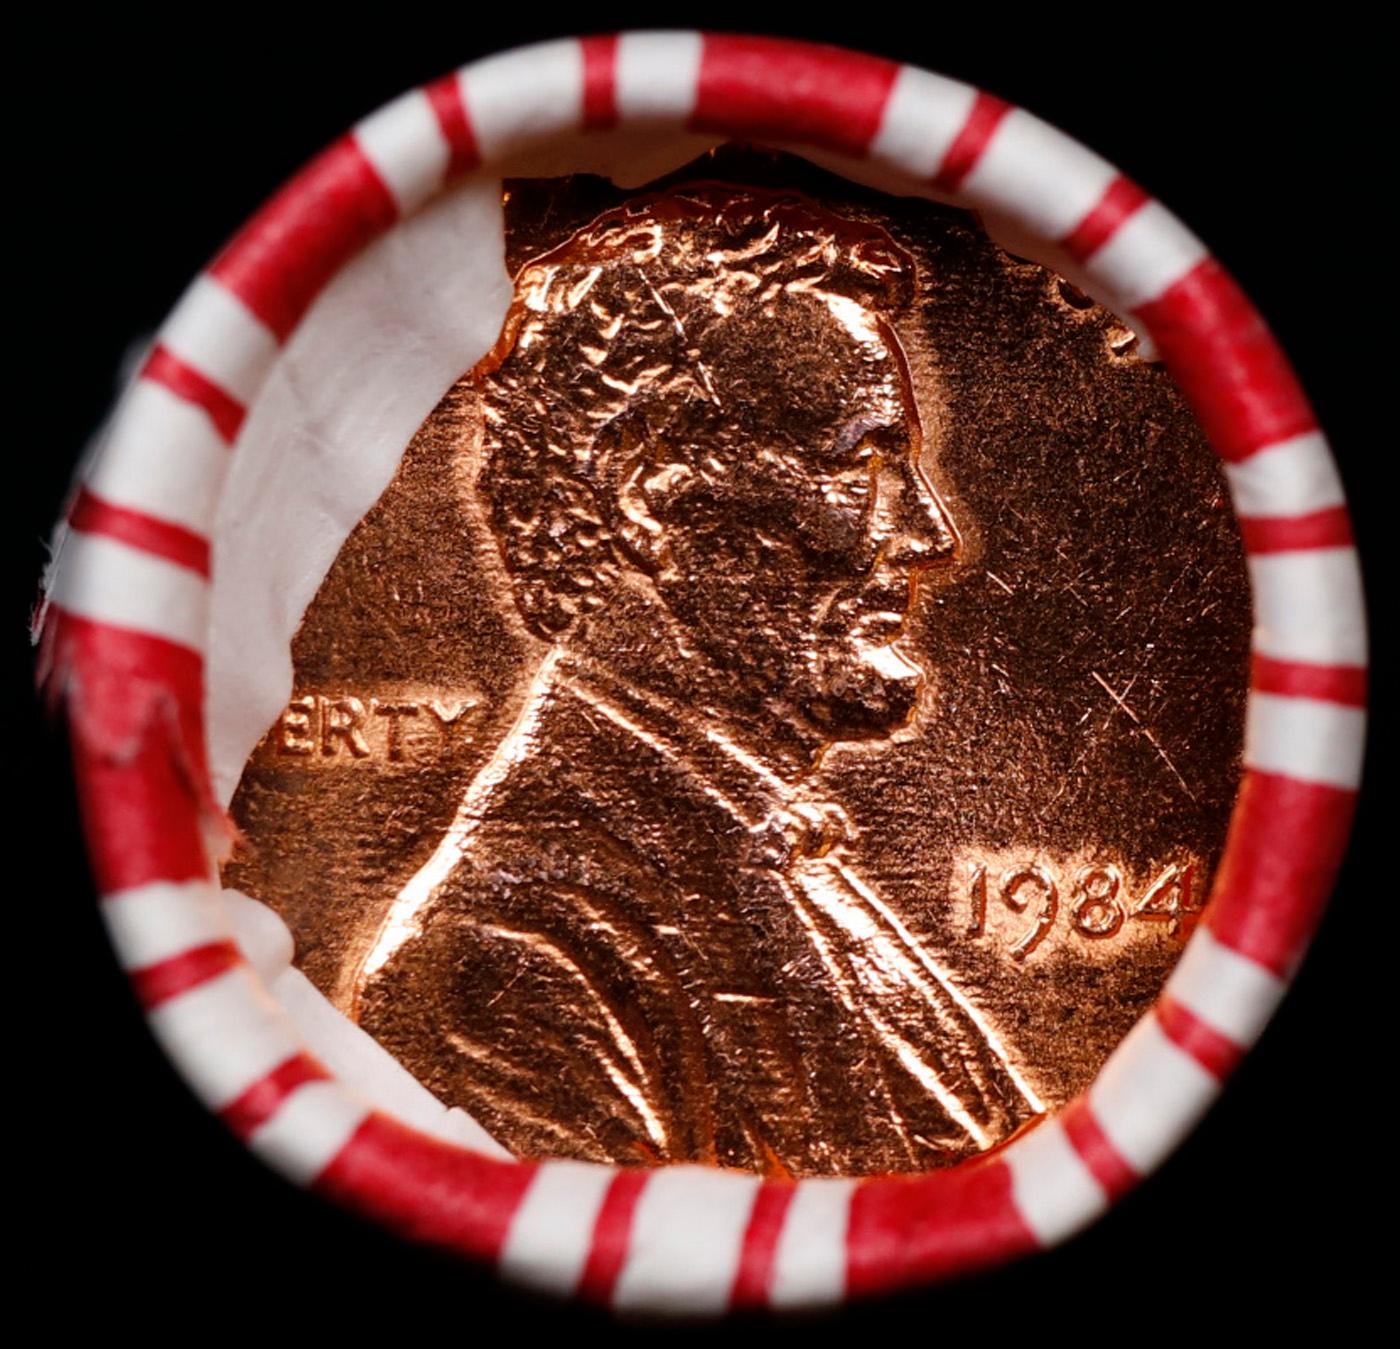 INSANITY The CRAZY Penny Wheel 1000’s won so far, WIN this 1984-p BU RED roll get 1-10 FREE